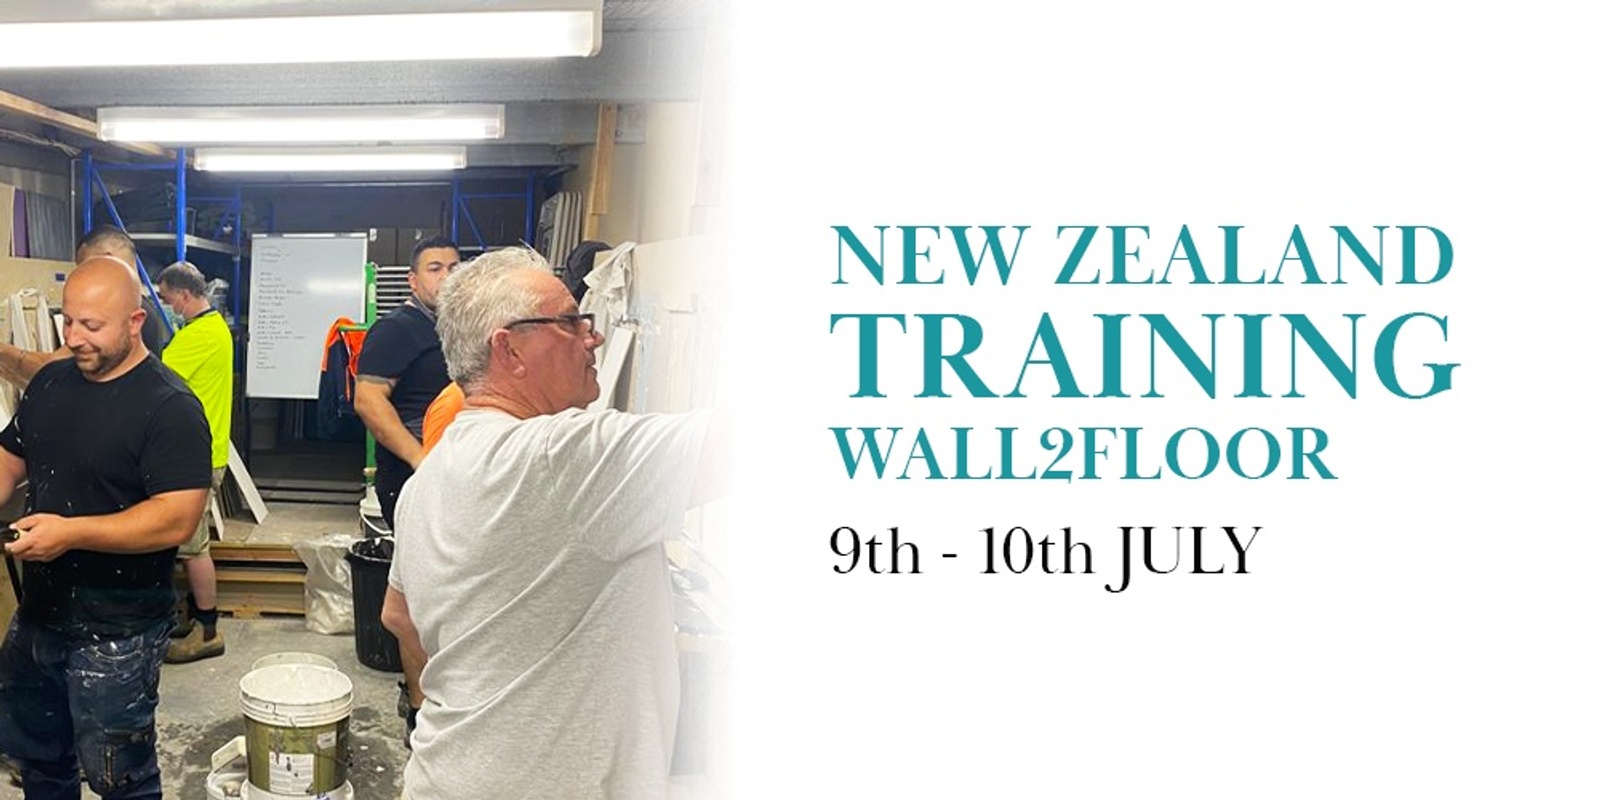 Banner image for WALL2FLOOR Novacolor Training - (9th - 10th) of July 2022 - New Zealand